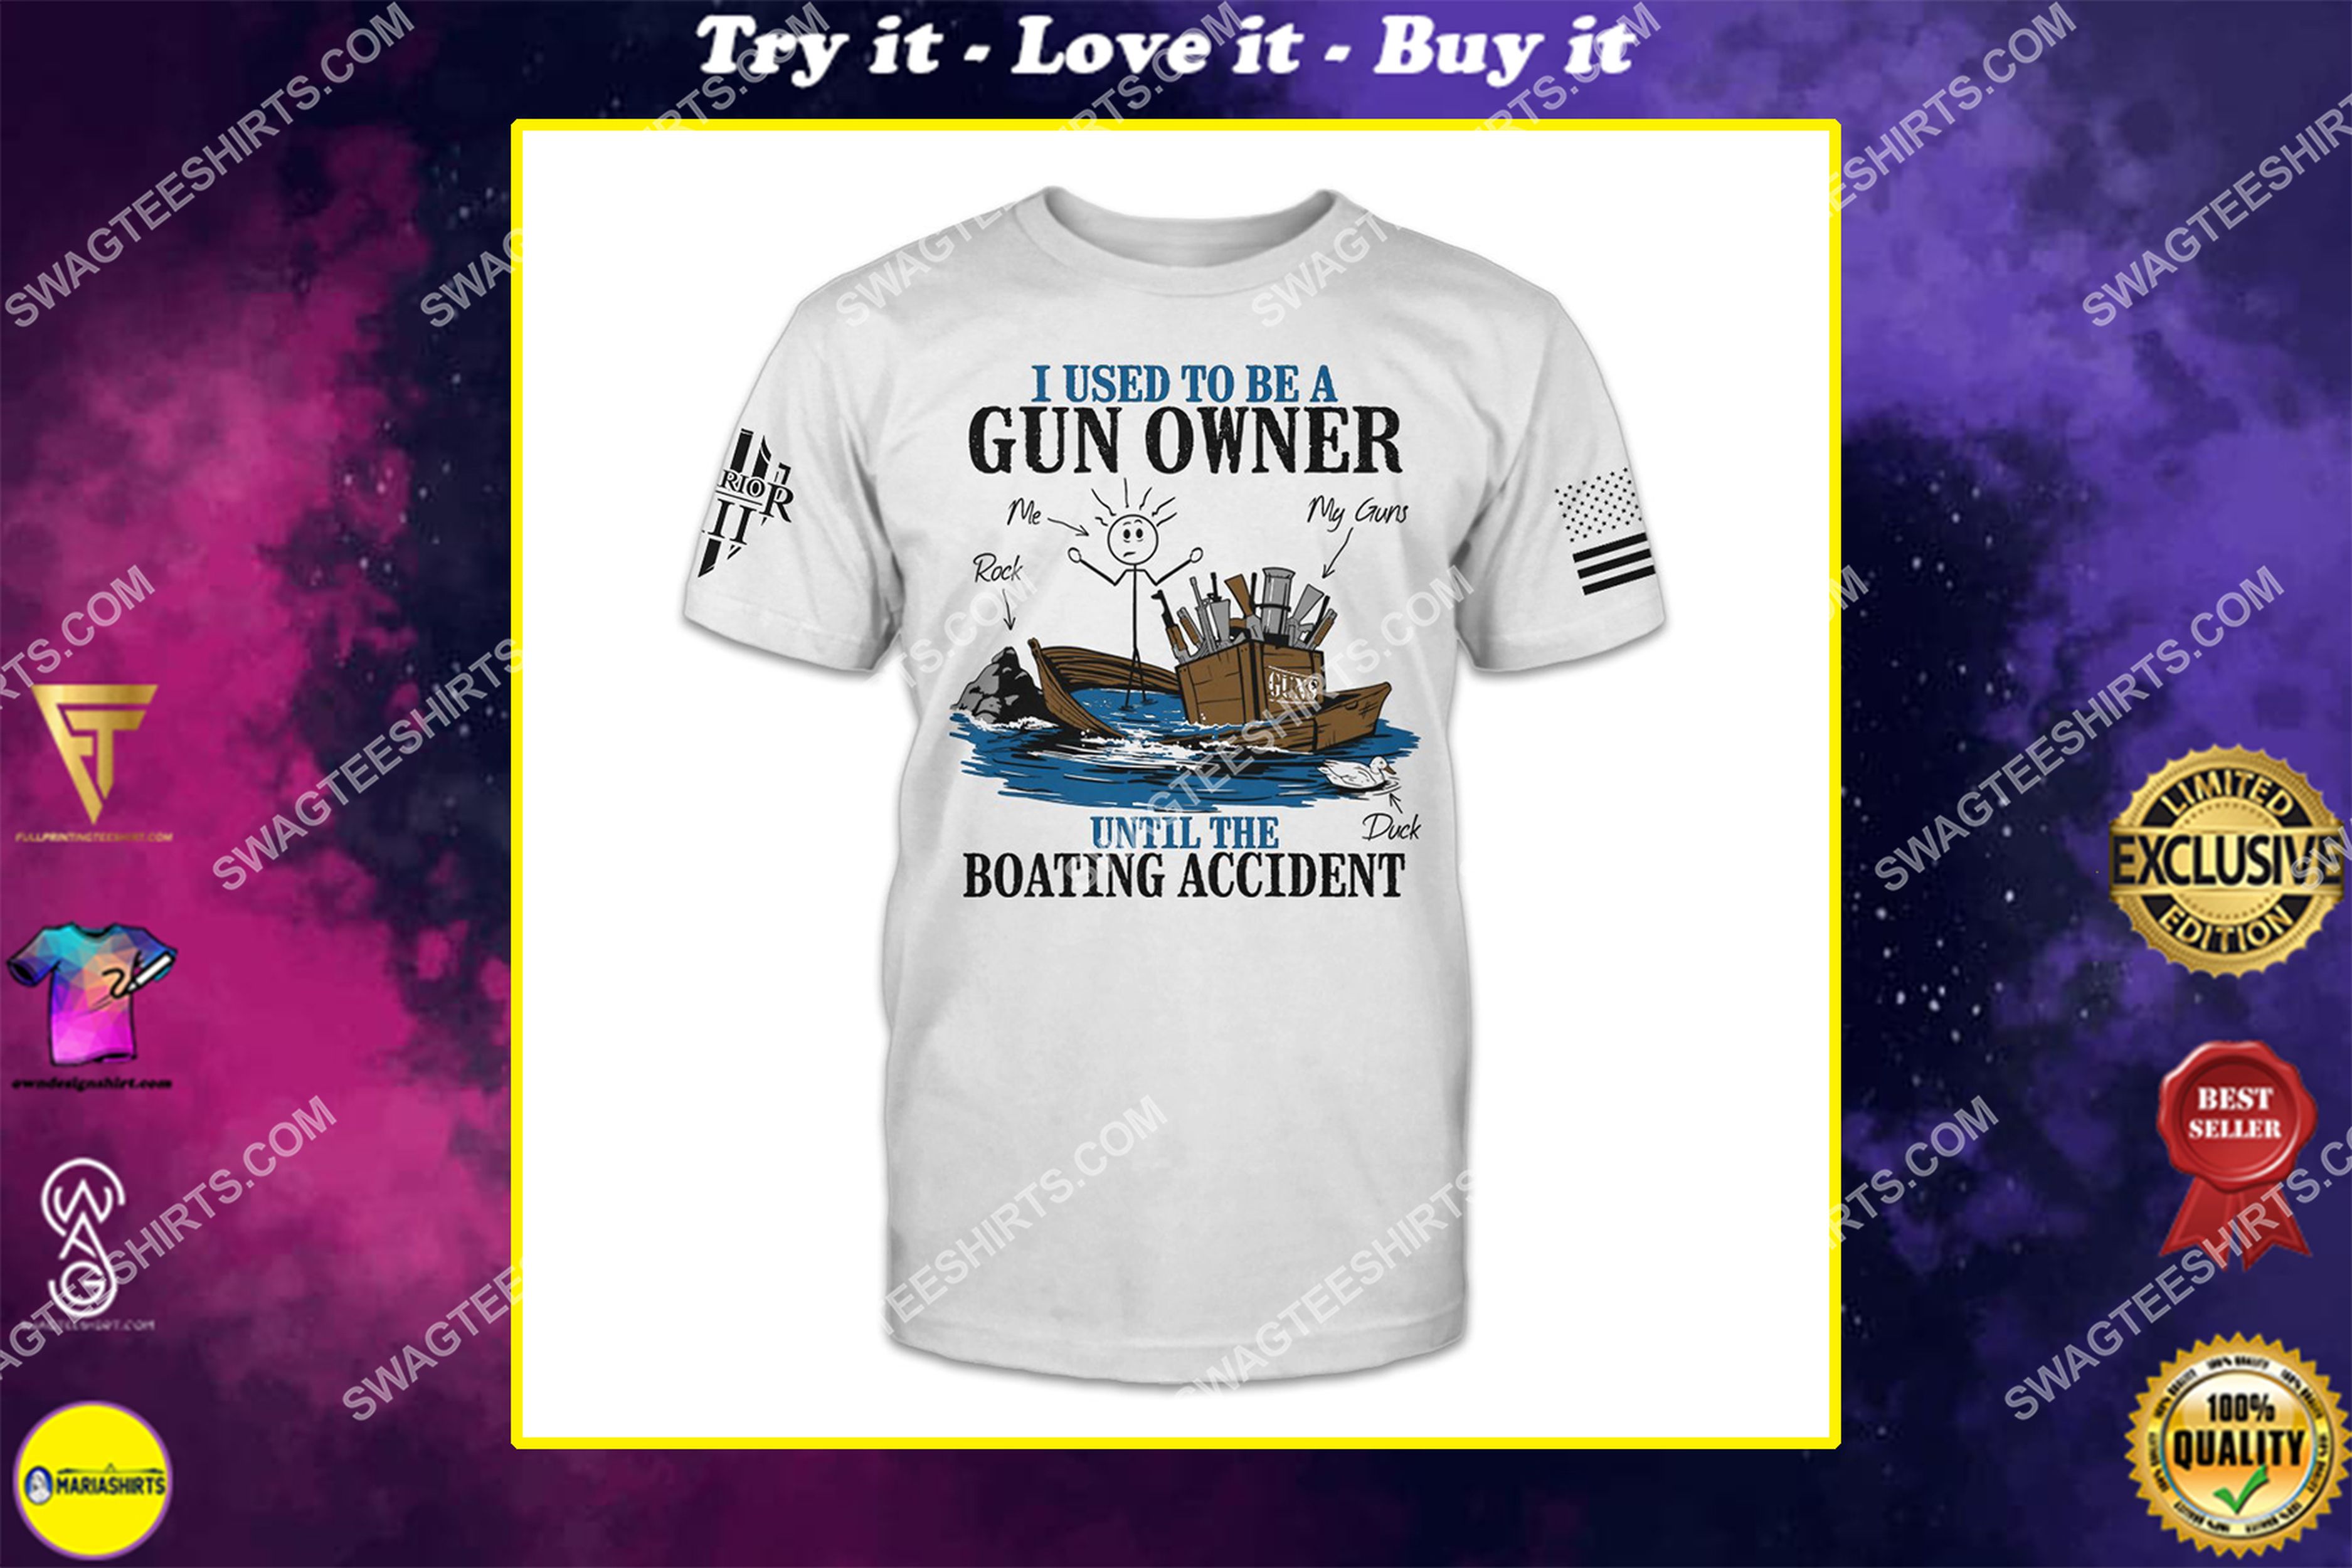 [special edition] i used to be a gun owner until the boating accident politics shirt – maria